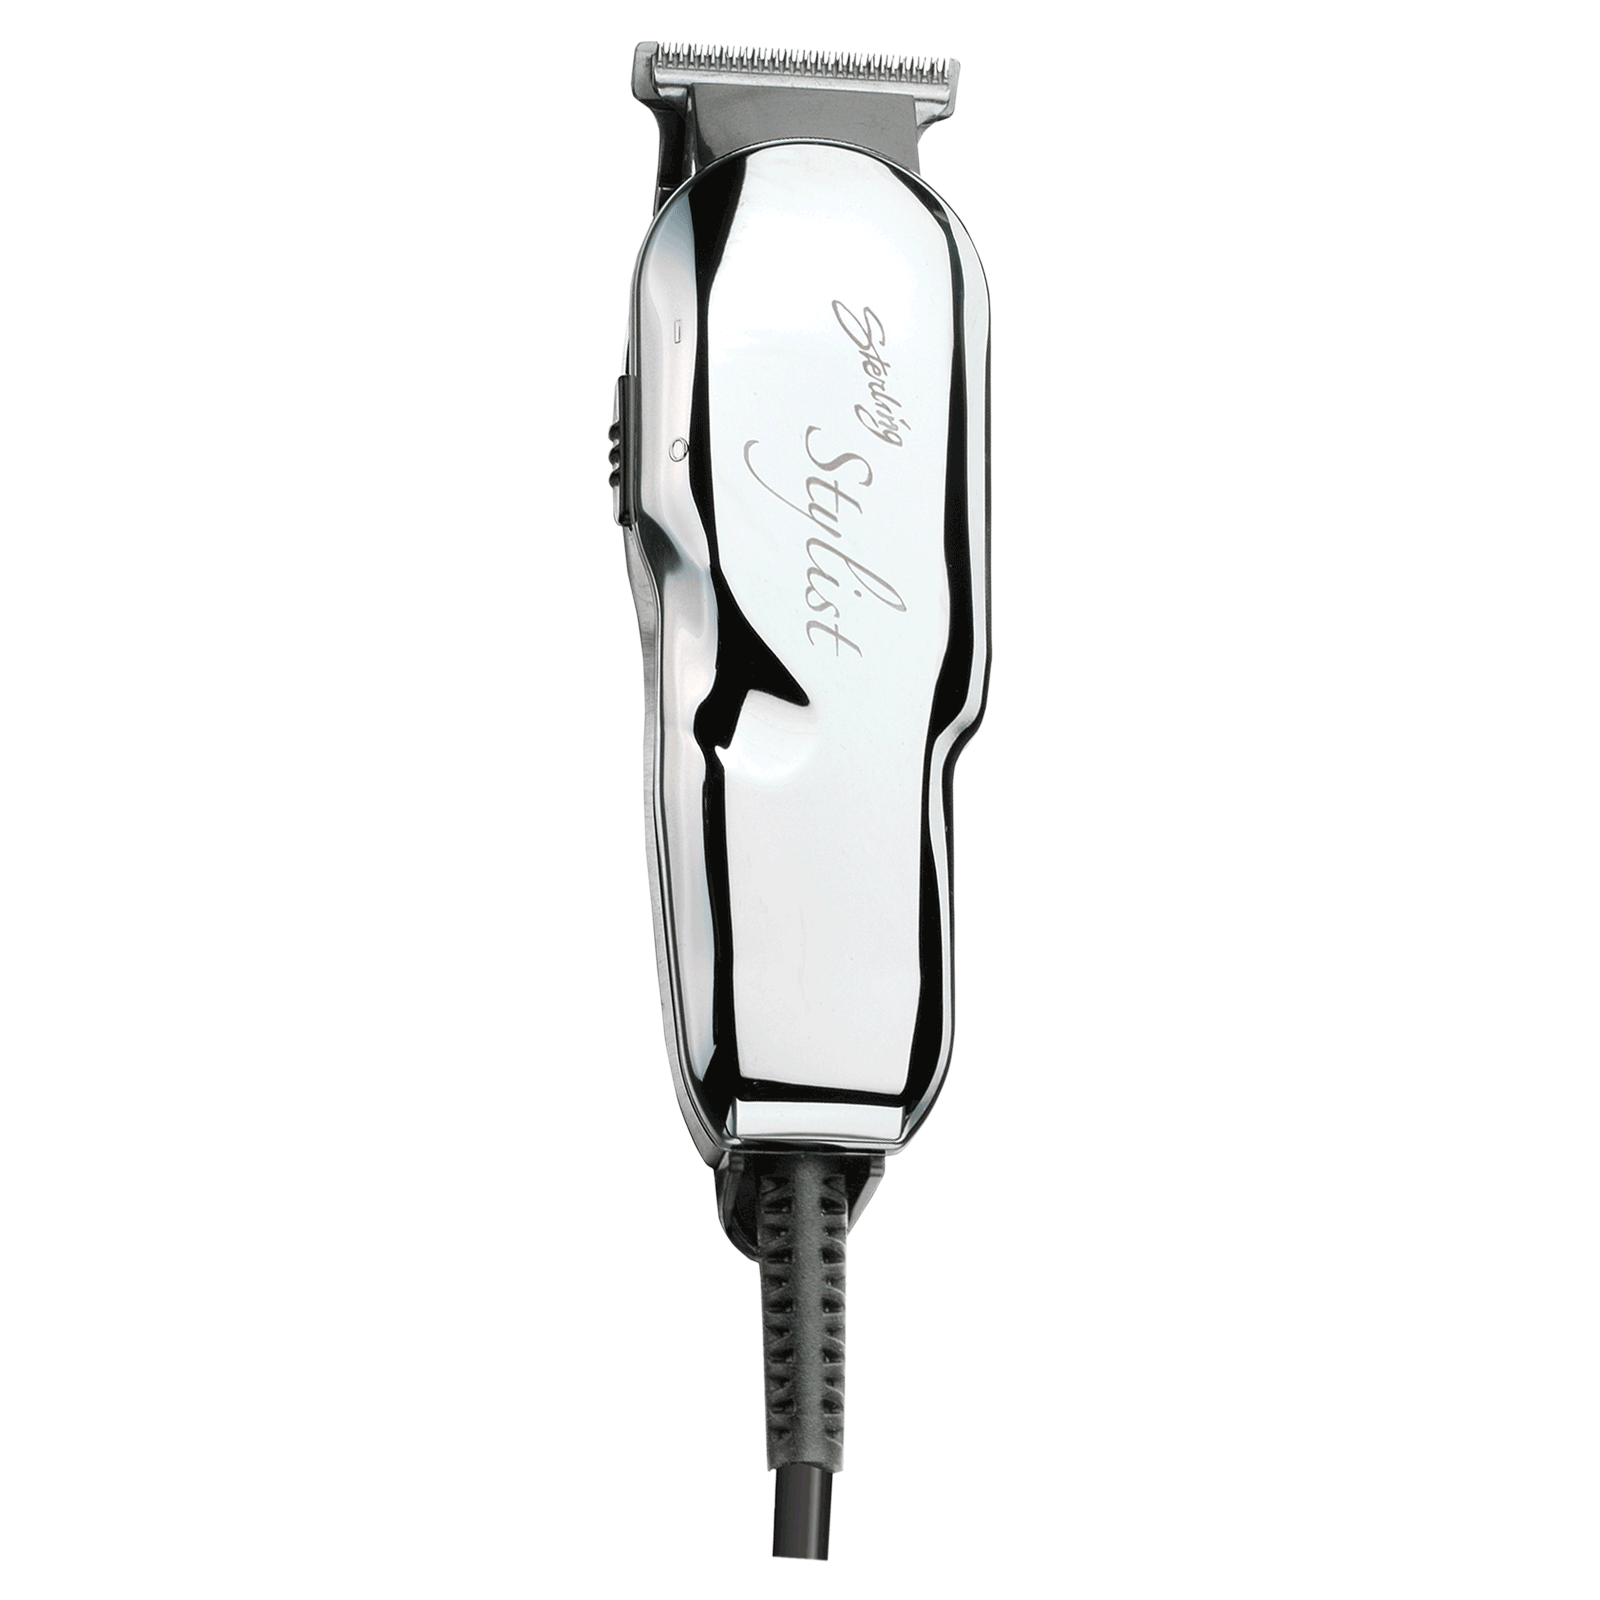 wahl clippers sterling